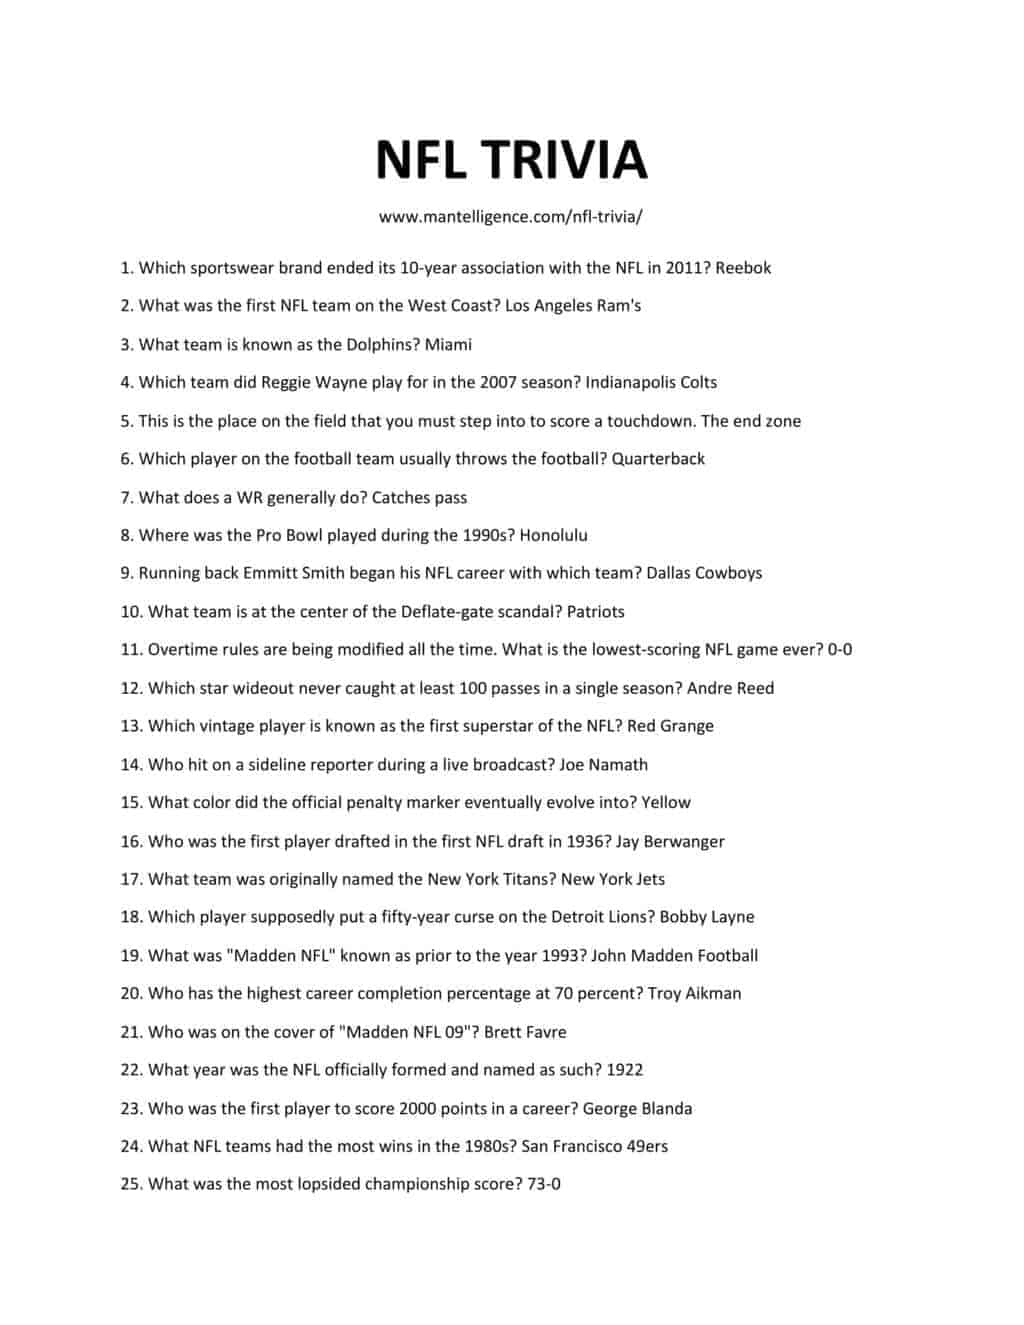 NFL Trivia Questions With Answers